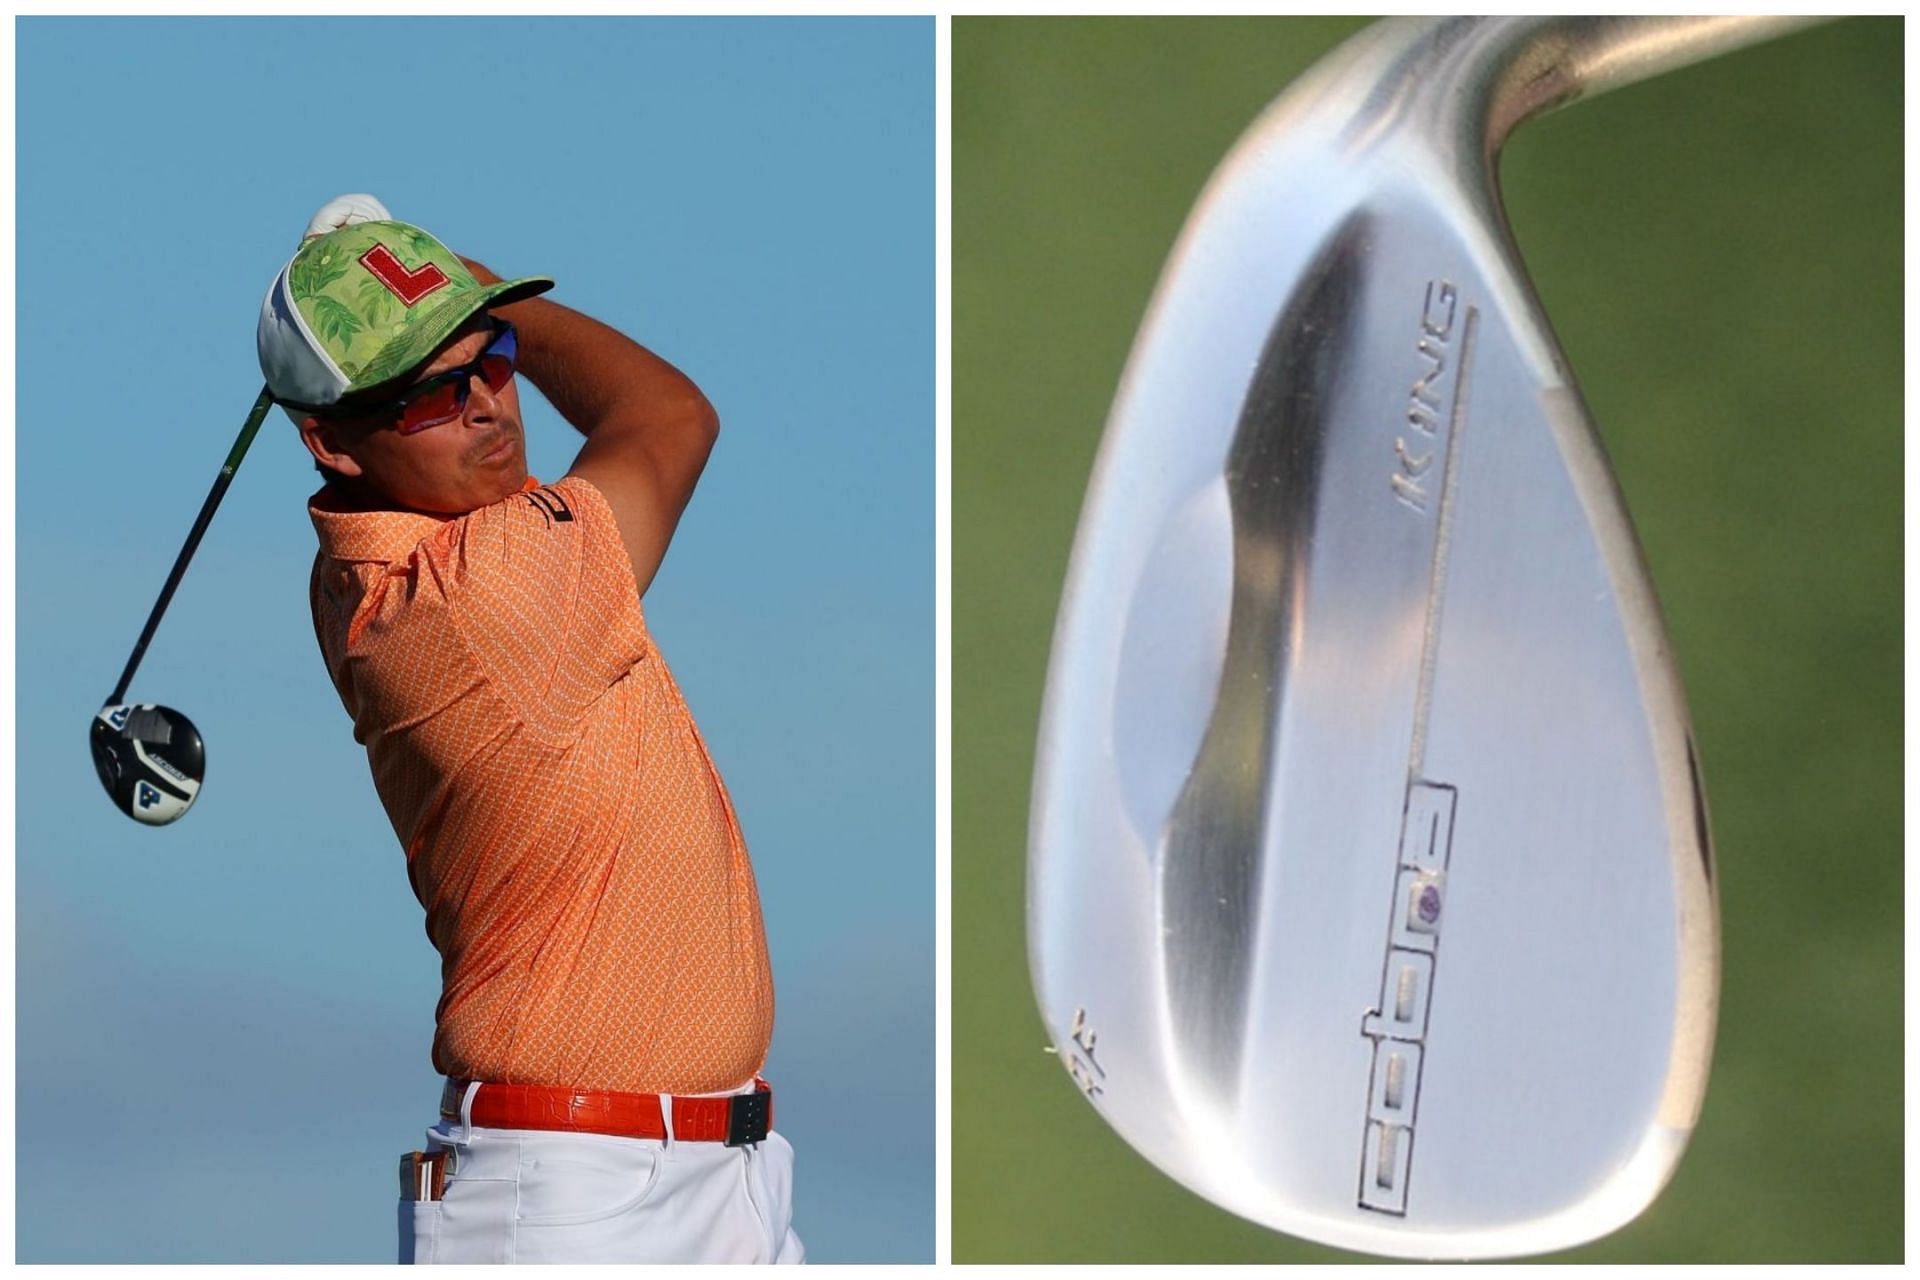 Rickie Fowler will use the RF engraved Cobra Golf 3D printed wedge at the American Express